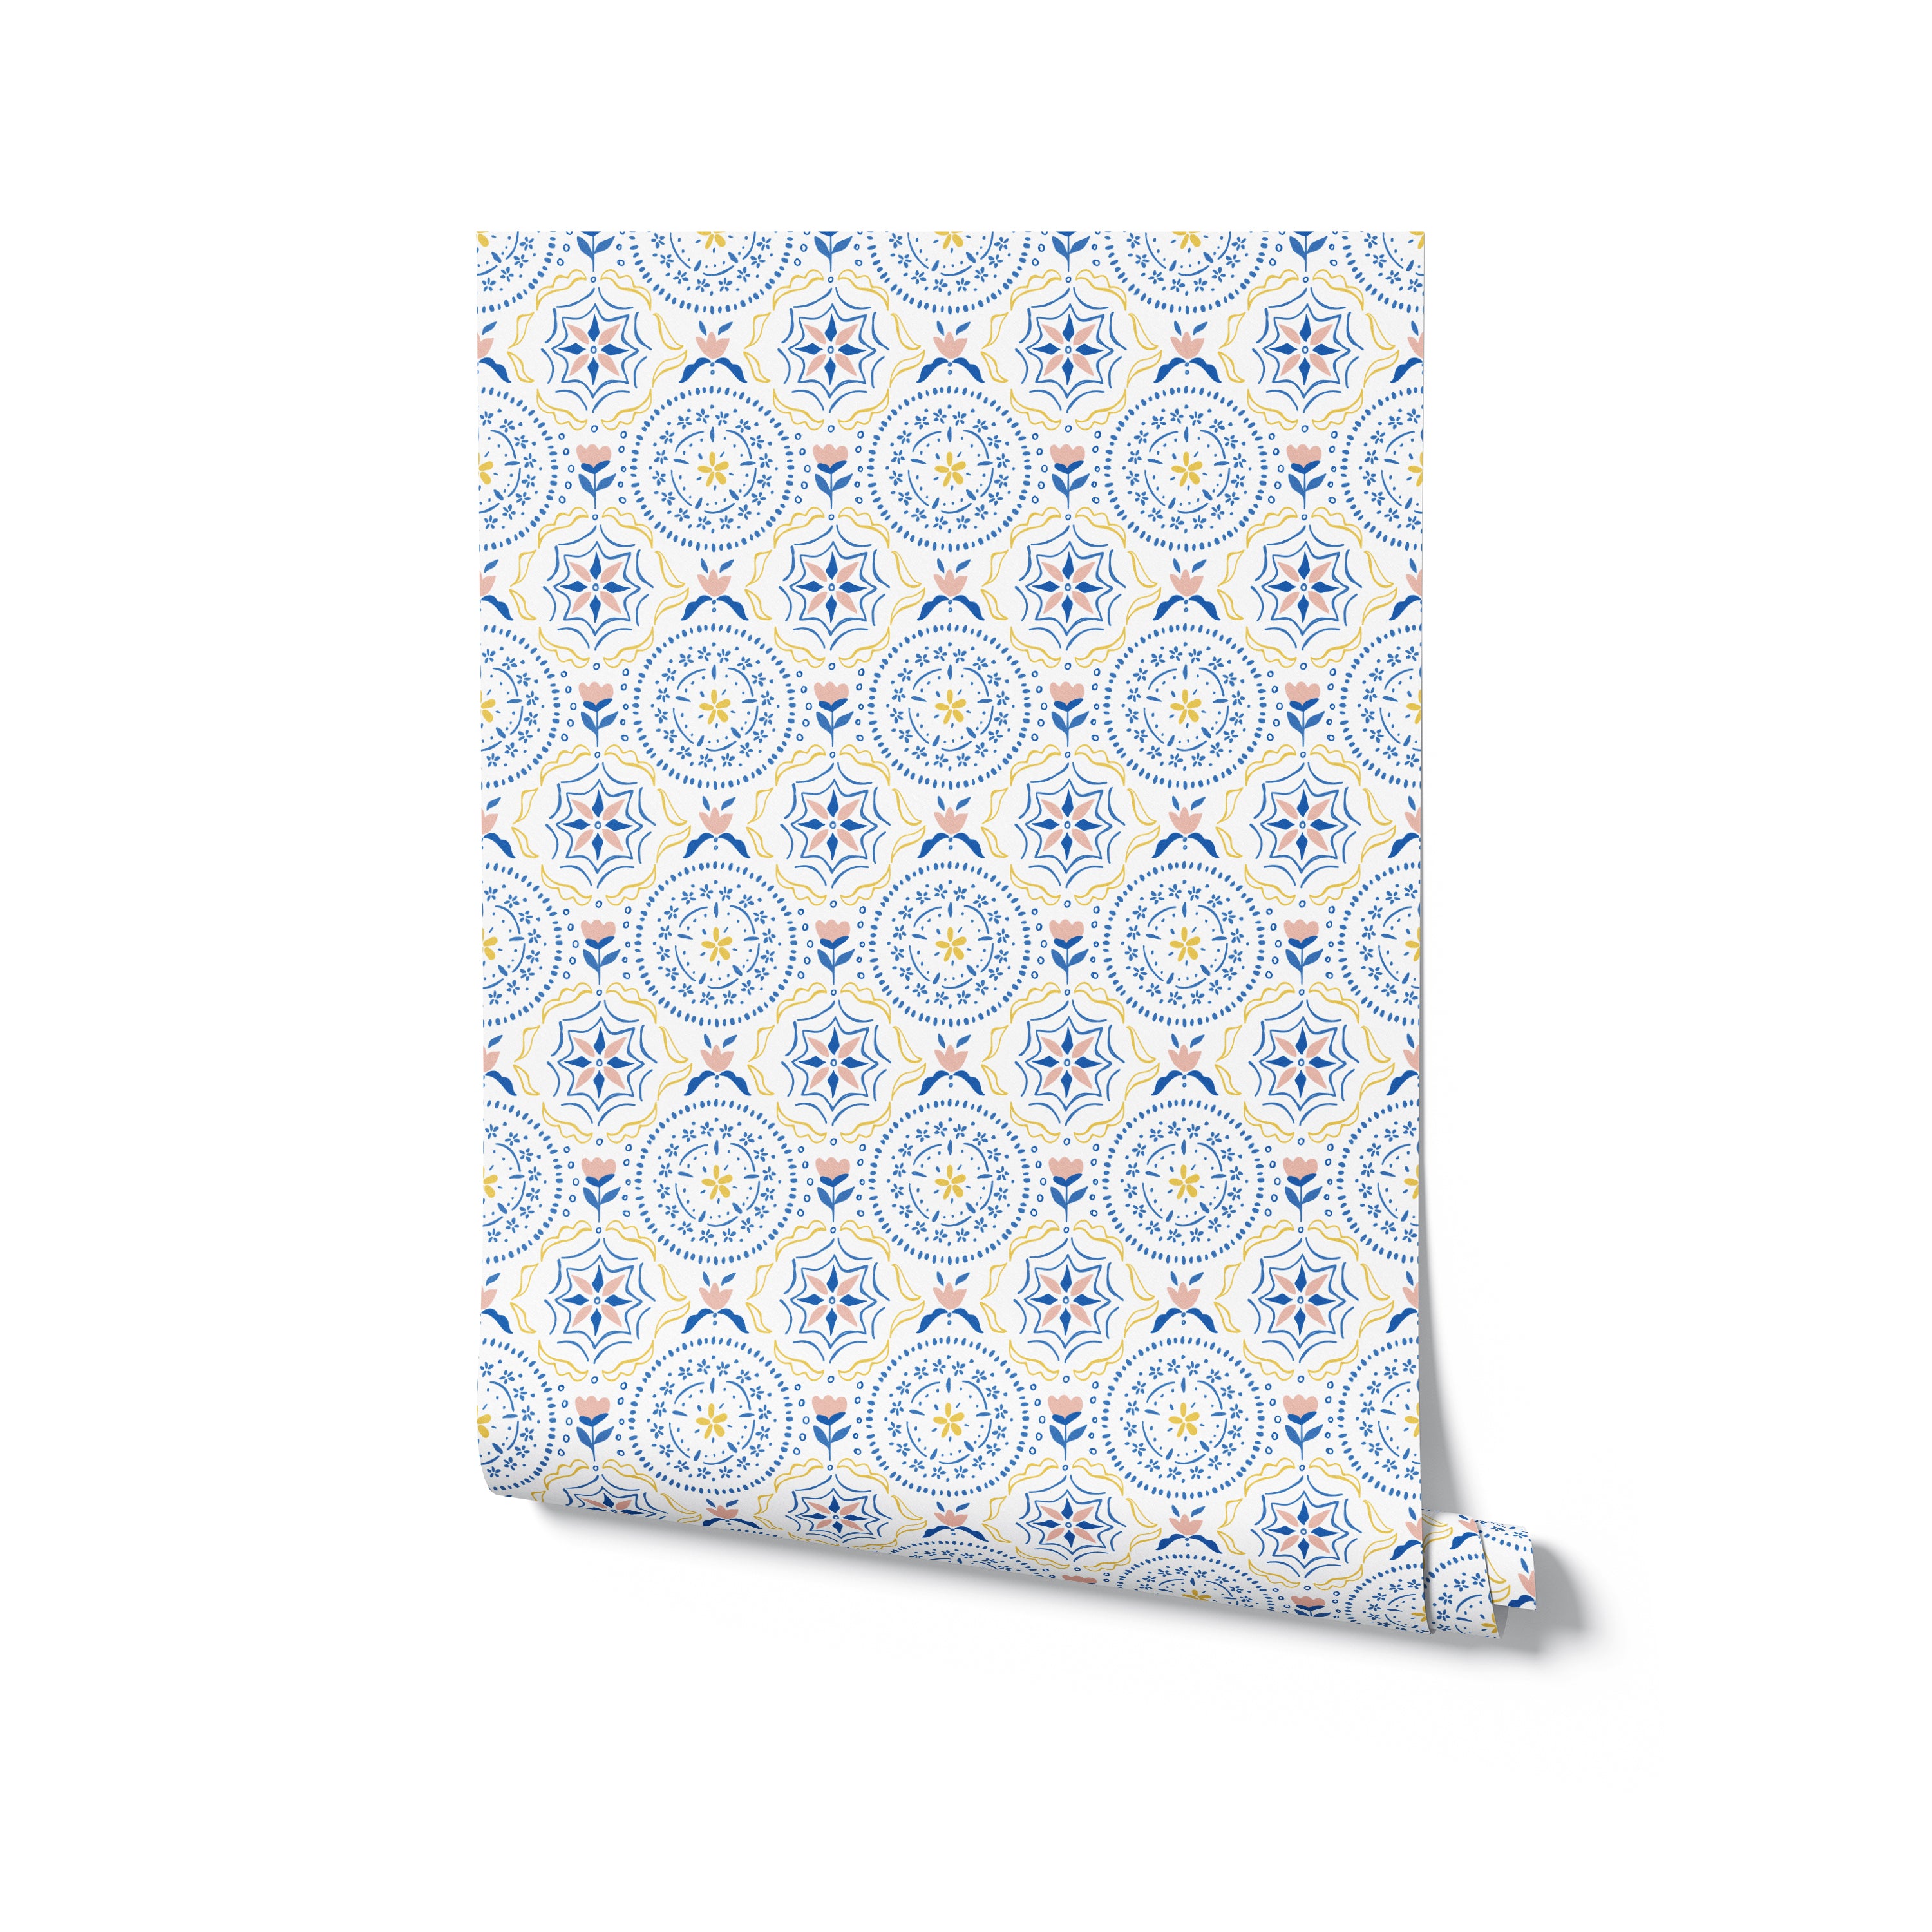 Rolled wallpaper with a detailed hand-drawn pattern of blue and yellow stars within intricate floral motifs on a white background.